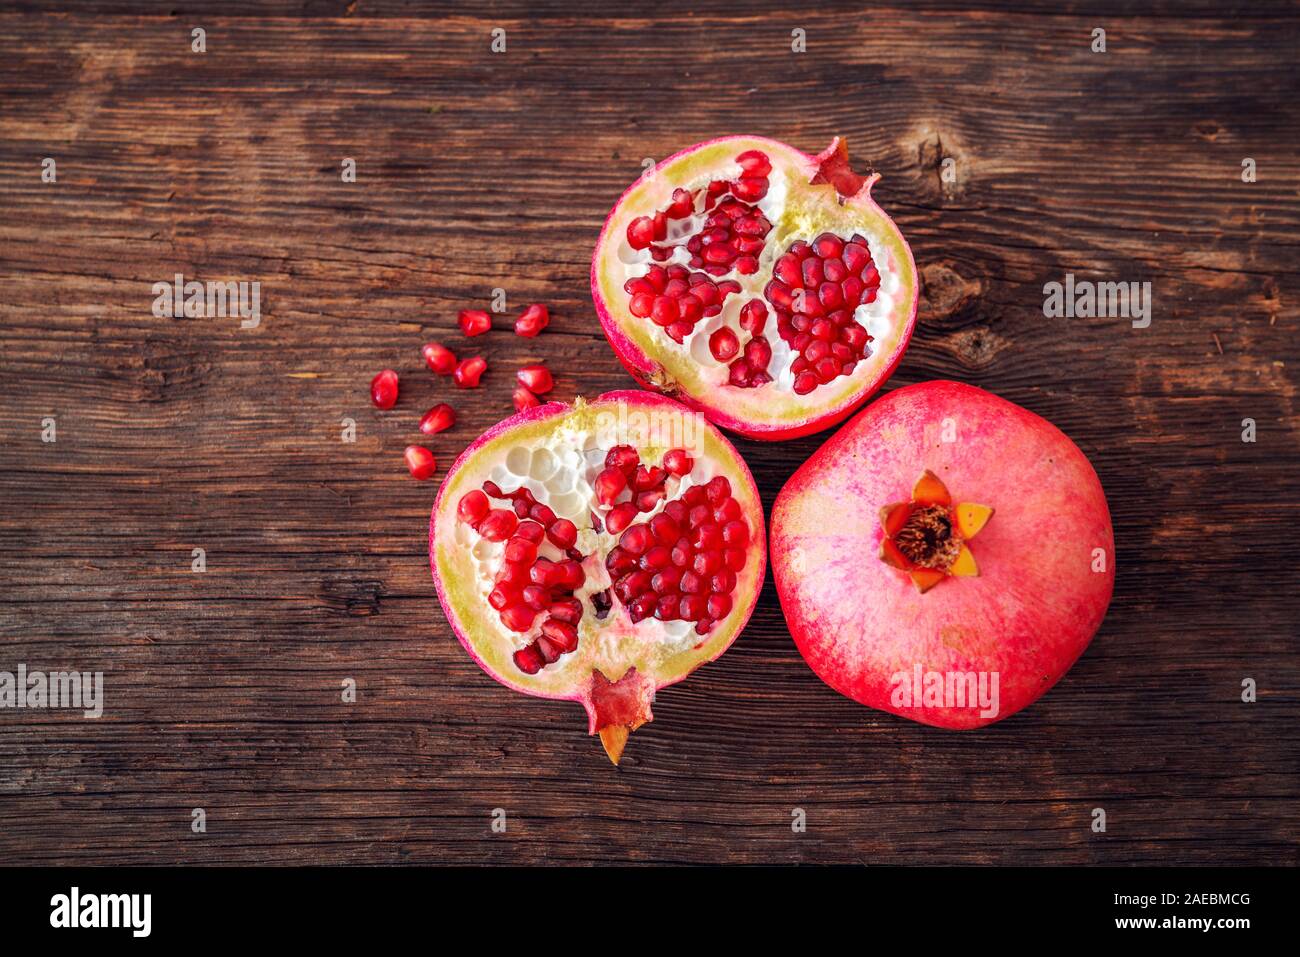 Ripe and fresh pomegranate peeled and ready for eat on wooden beackground. Stock Photo